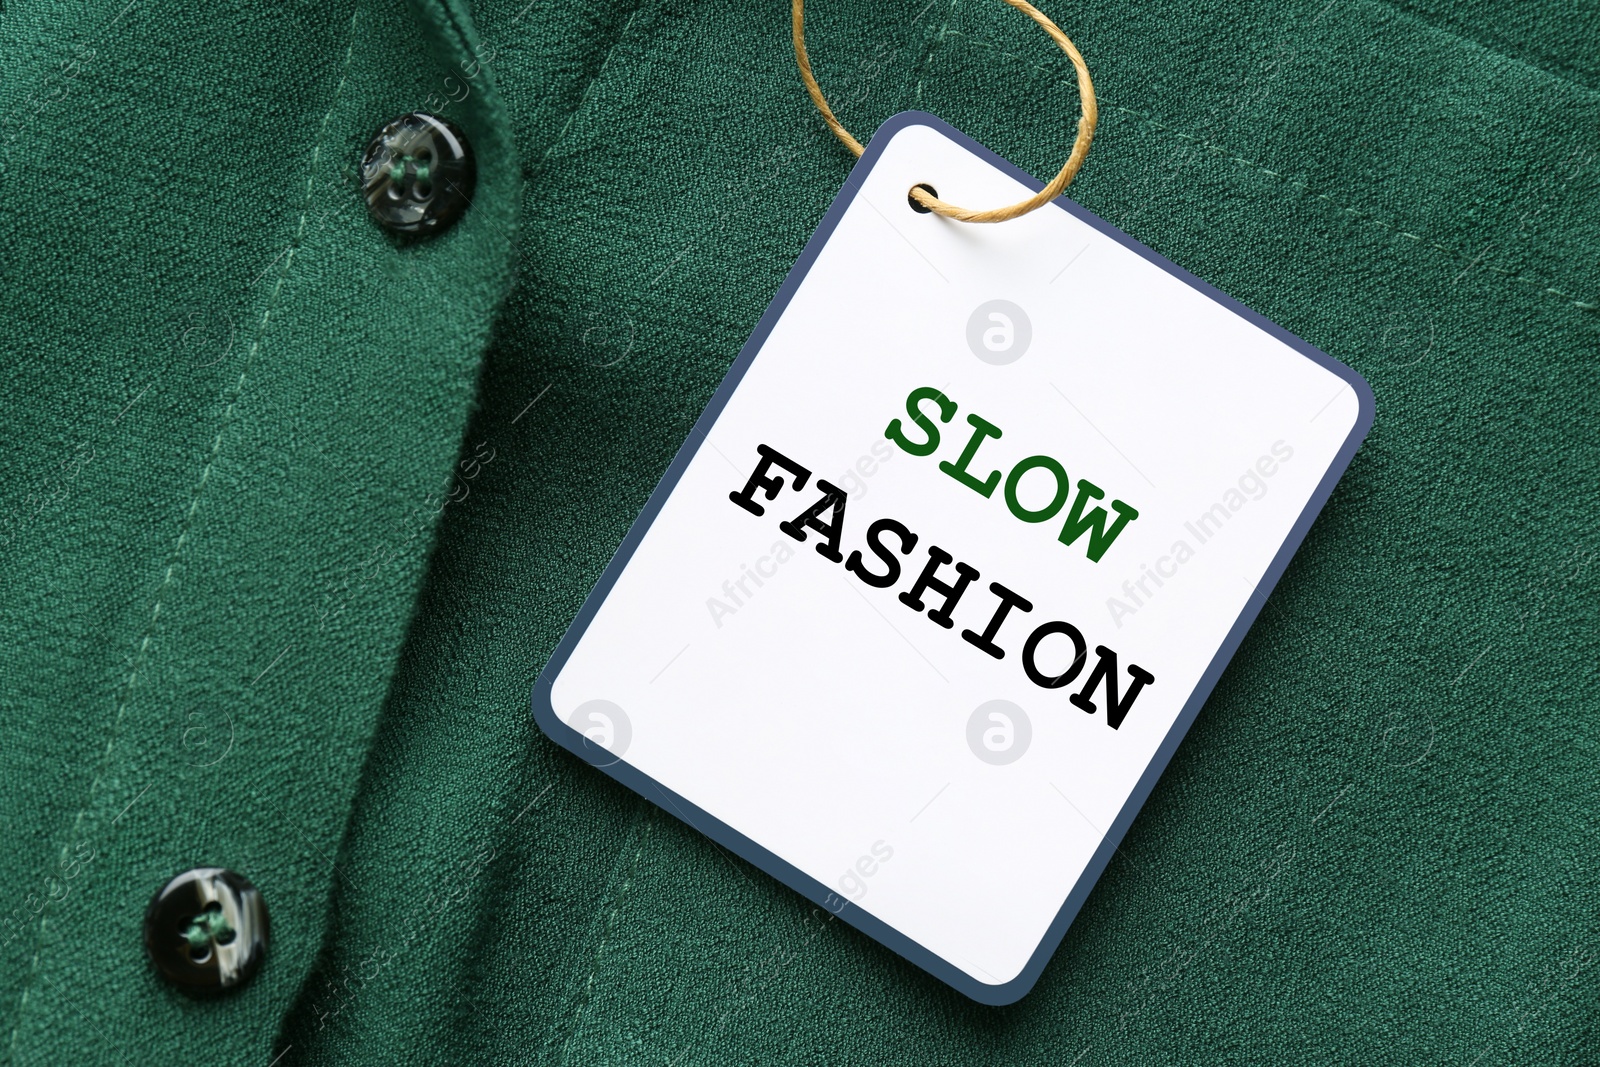 Image of Conscious consumption. Tag with words Slow Fashion on green shirt, top view